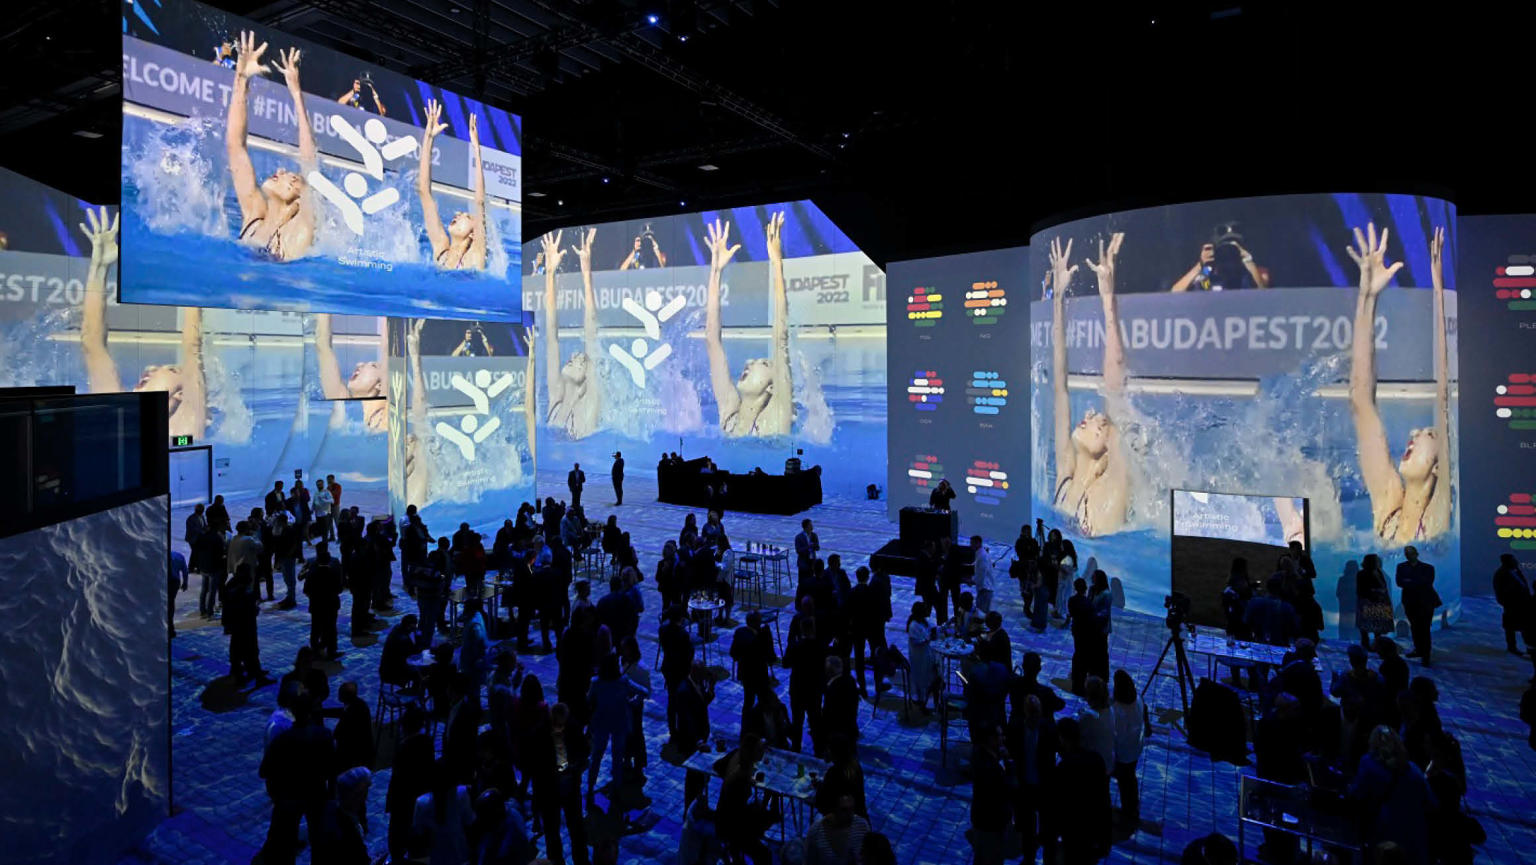 A large crowd assembled in a room enveloped by expansive digital screens forming the walls. The screens showcase captivating visuals of swimmers in a swimming pool.